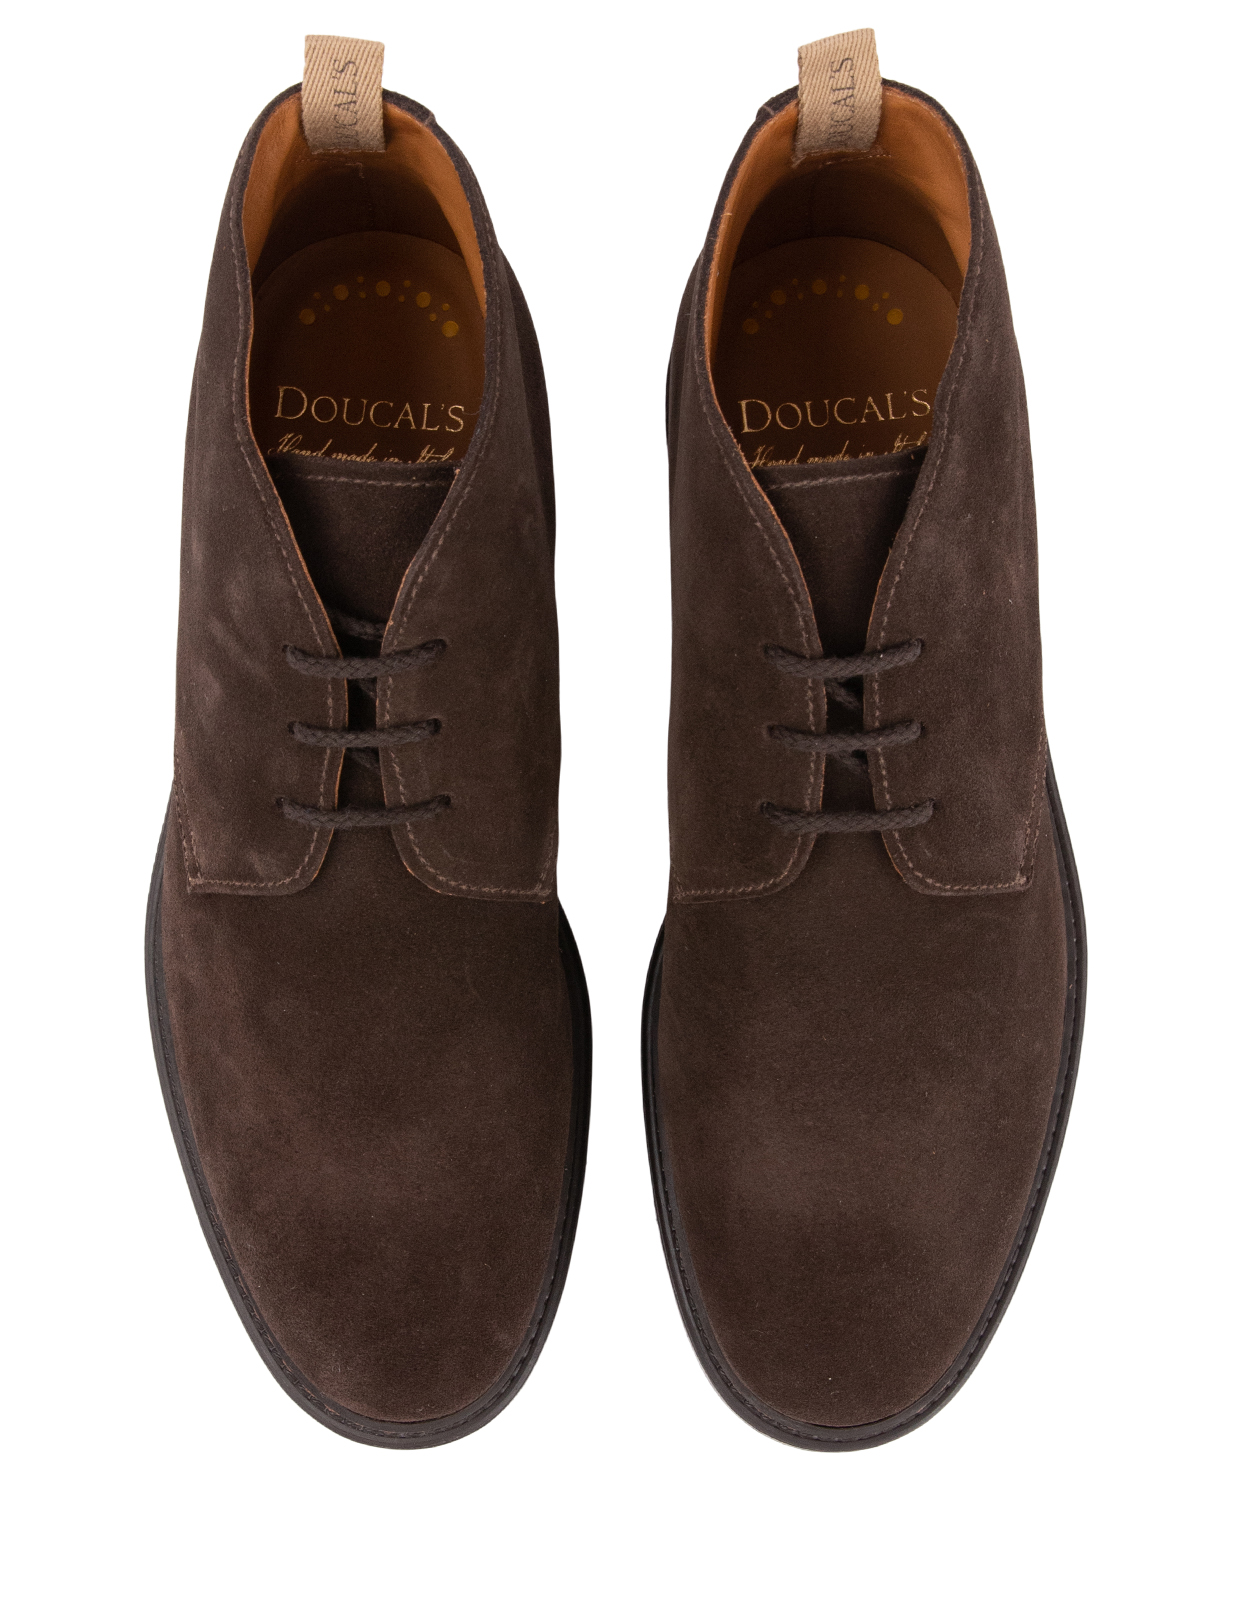 Chukka Boots Suede T.Moro Stl 43.5